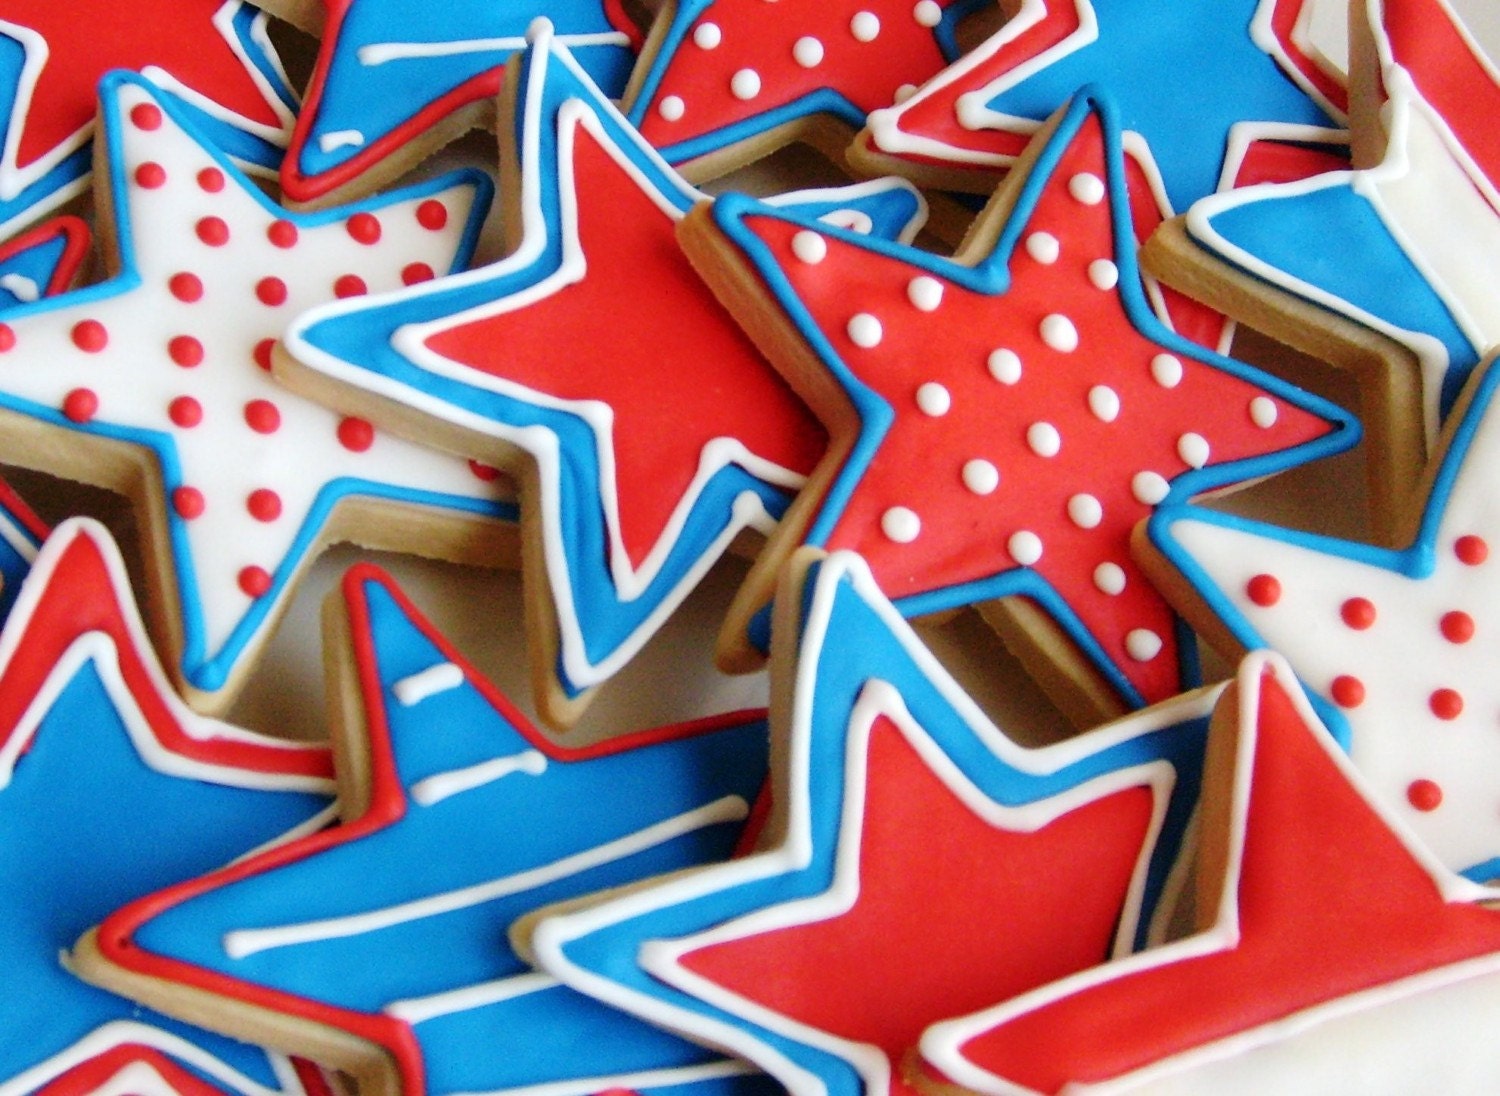 STARS and MORE STARS Decorated Cookie Favors Partriotic